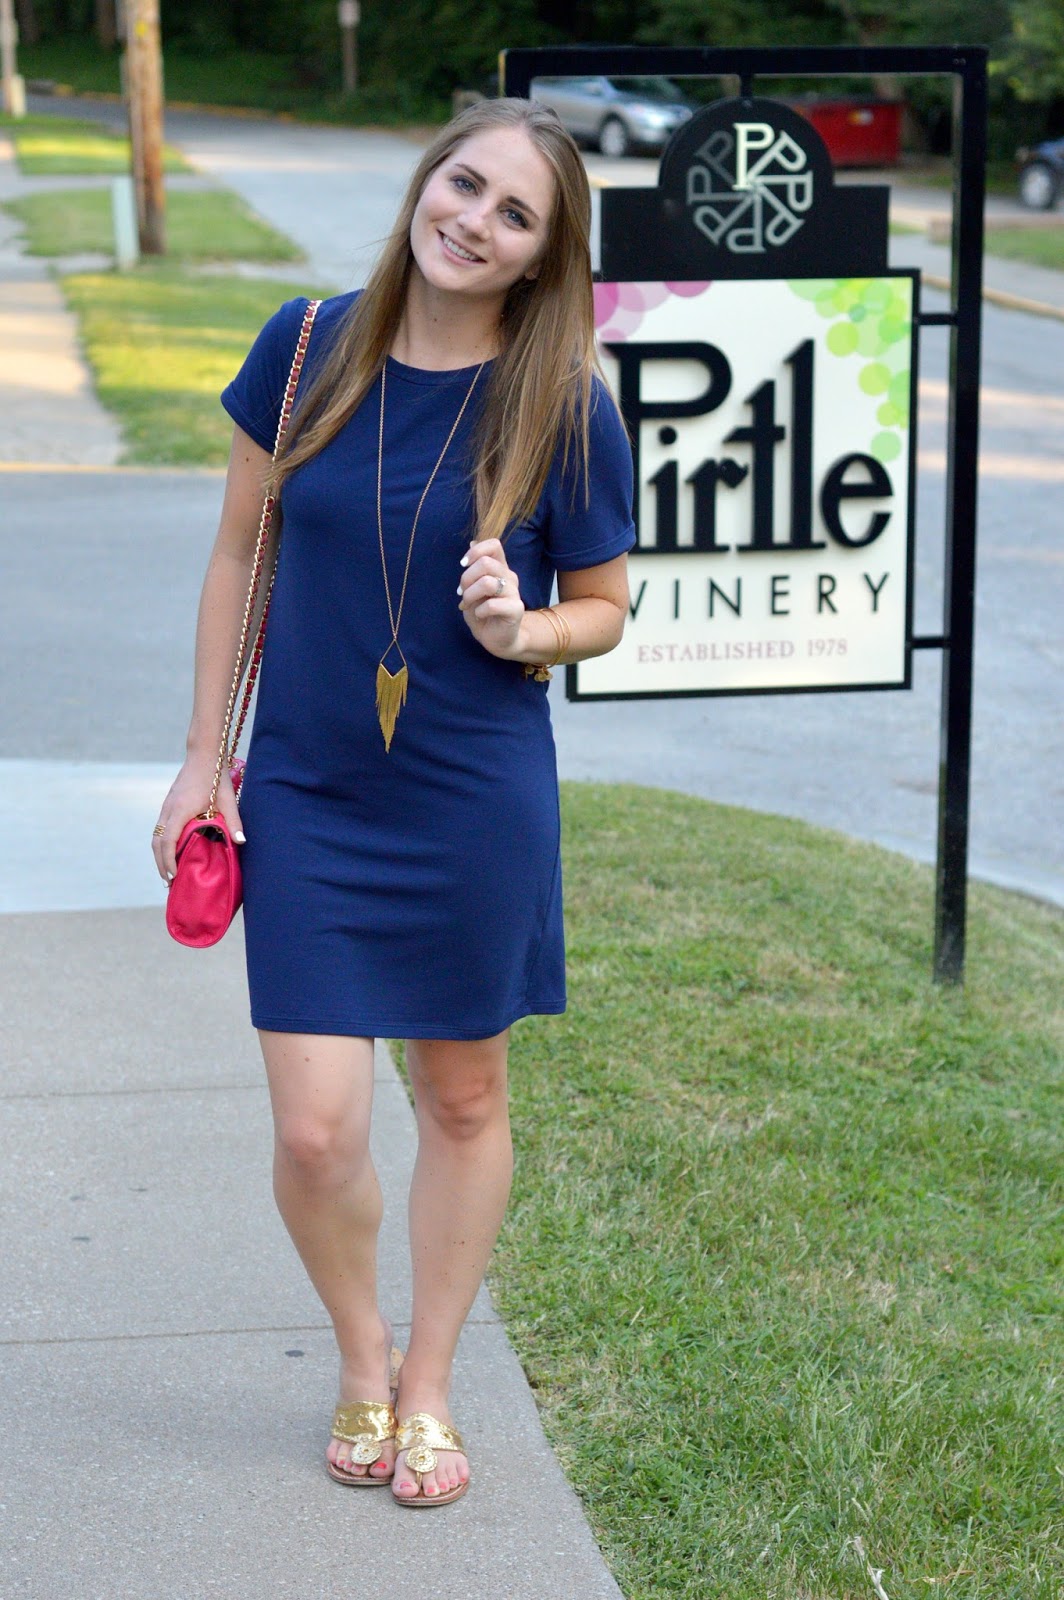 A Memory Of Us: wine tasting at pirtle winery | A Kansas City Fashion Blog